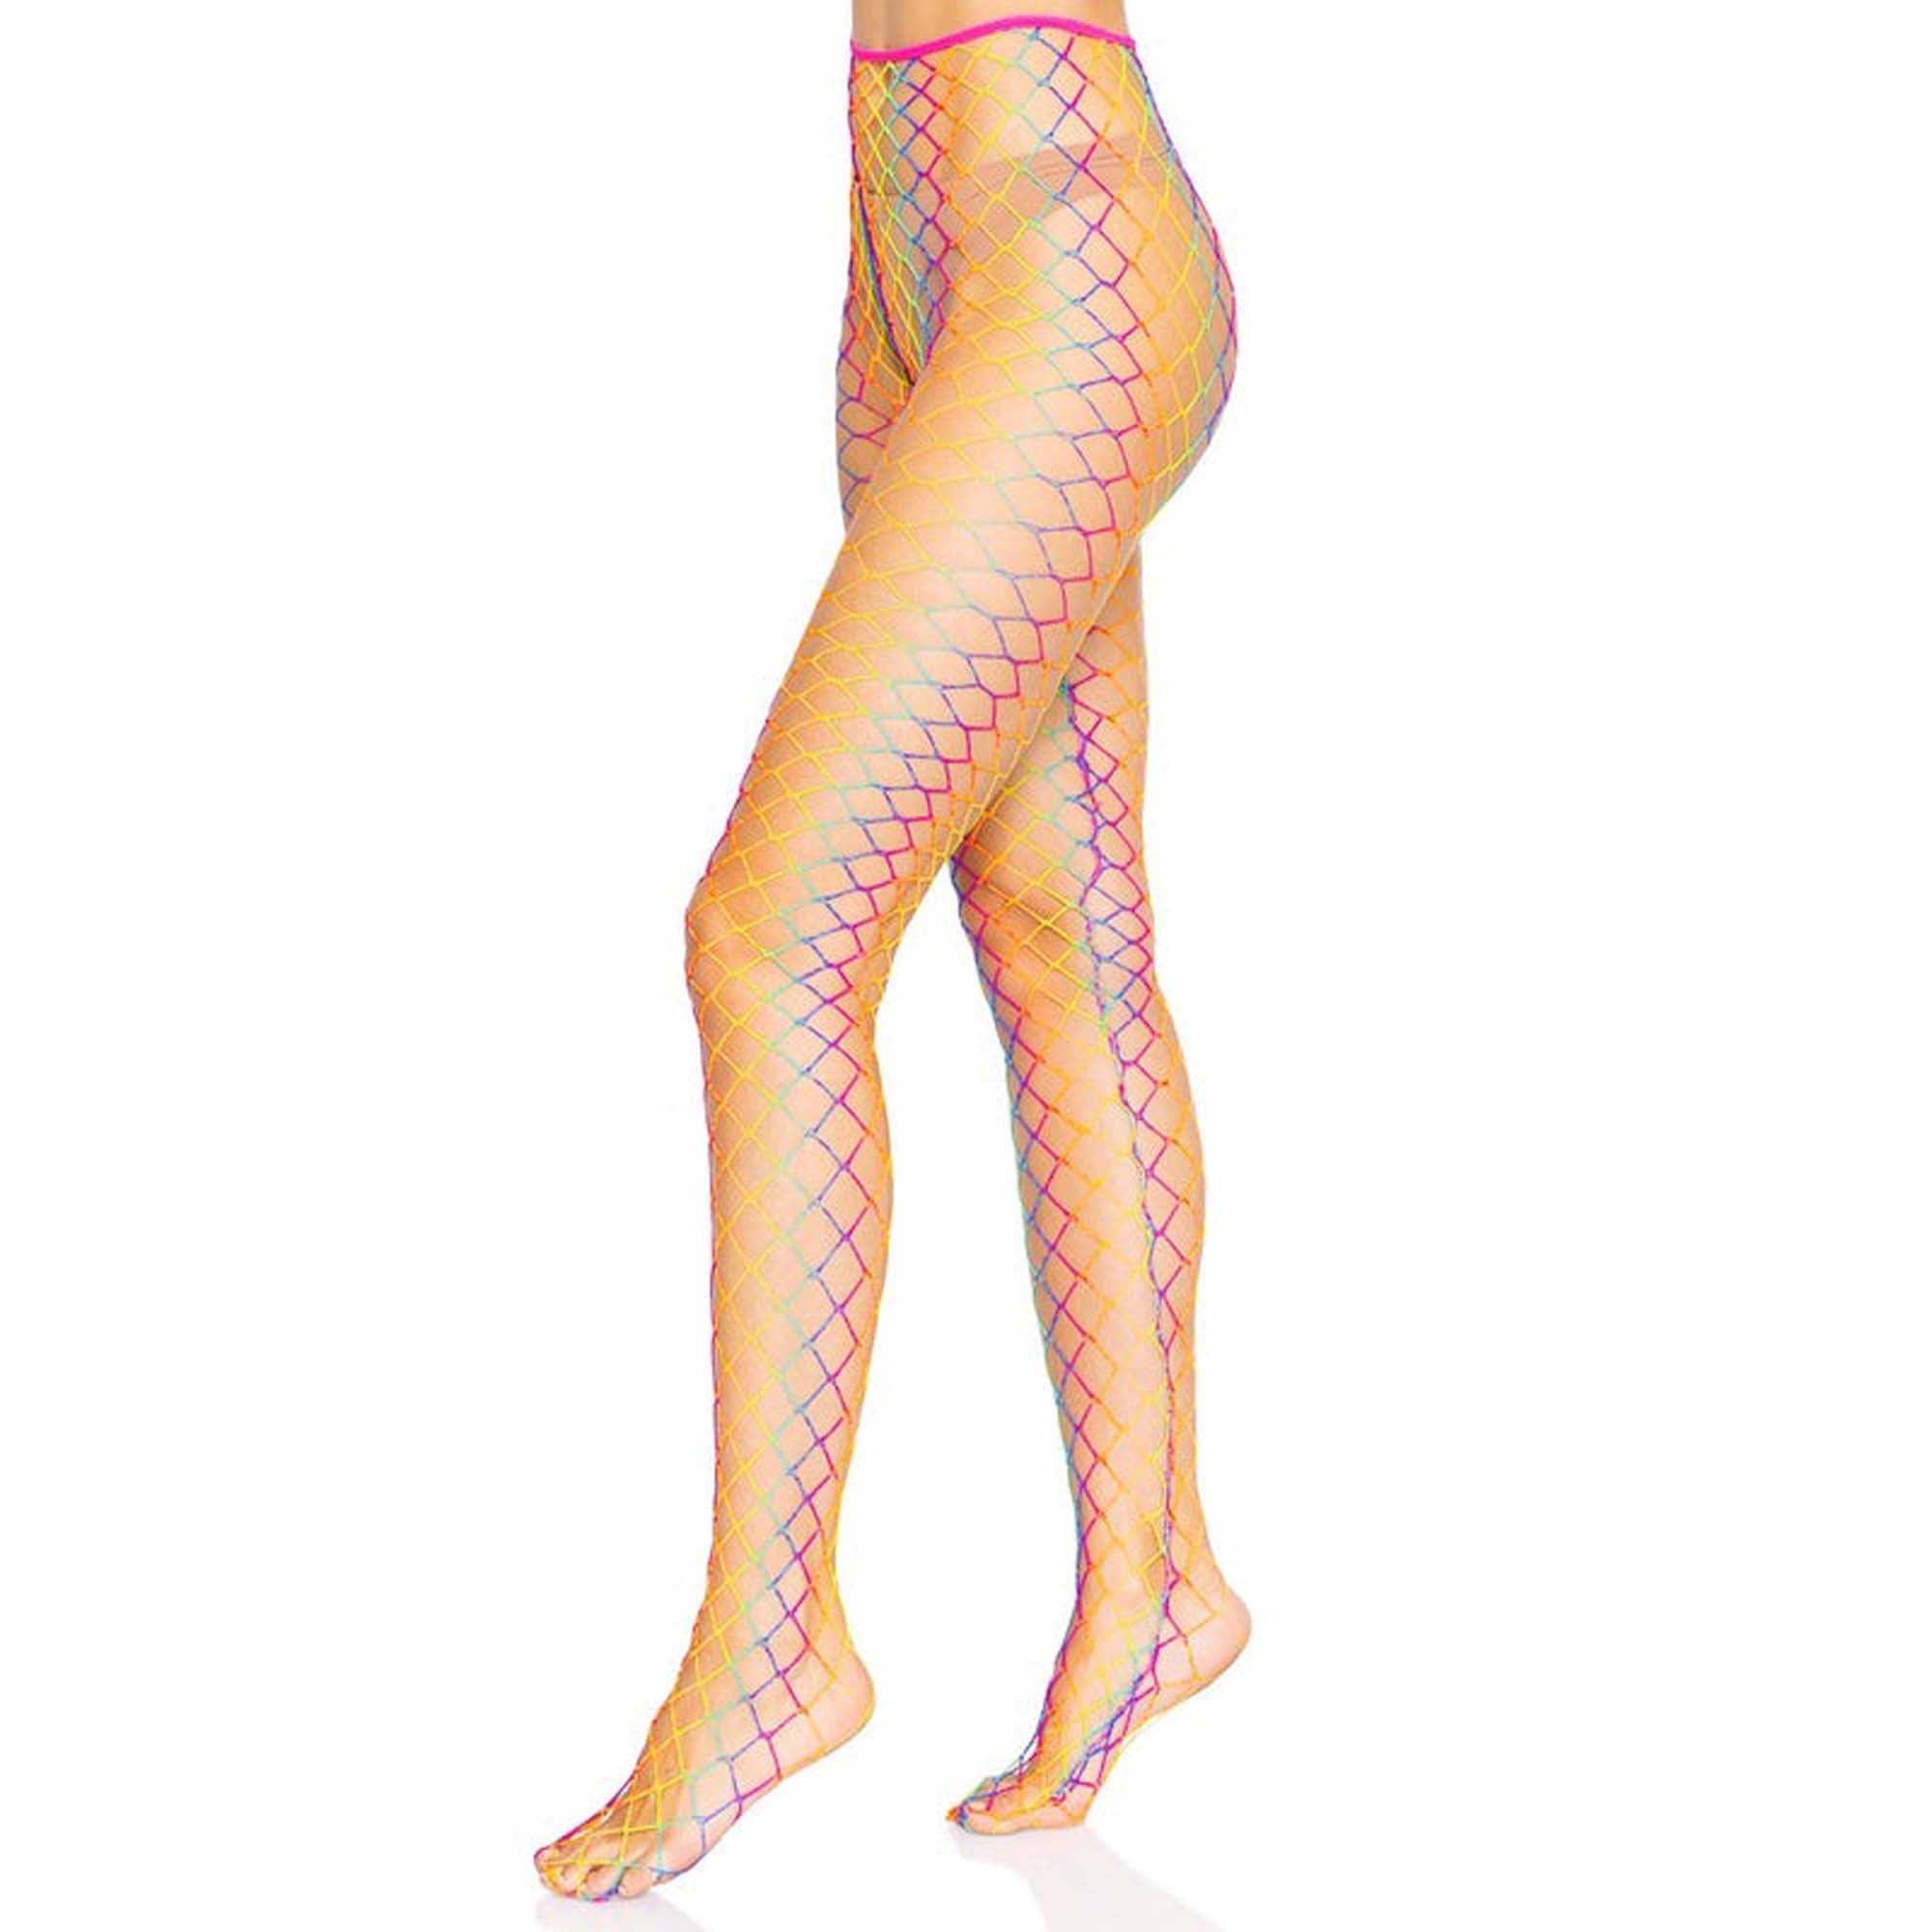 Black Cracked Fishnet Tights for Adults, 1 Count